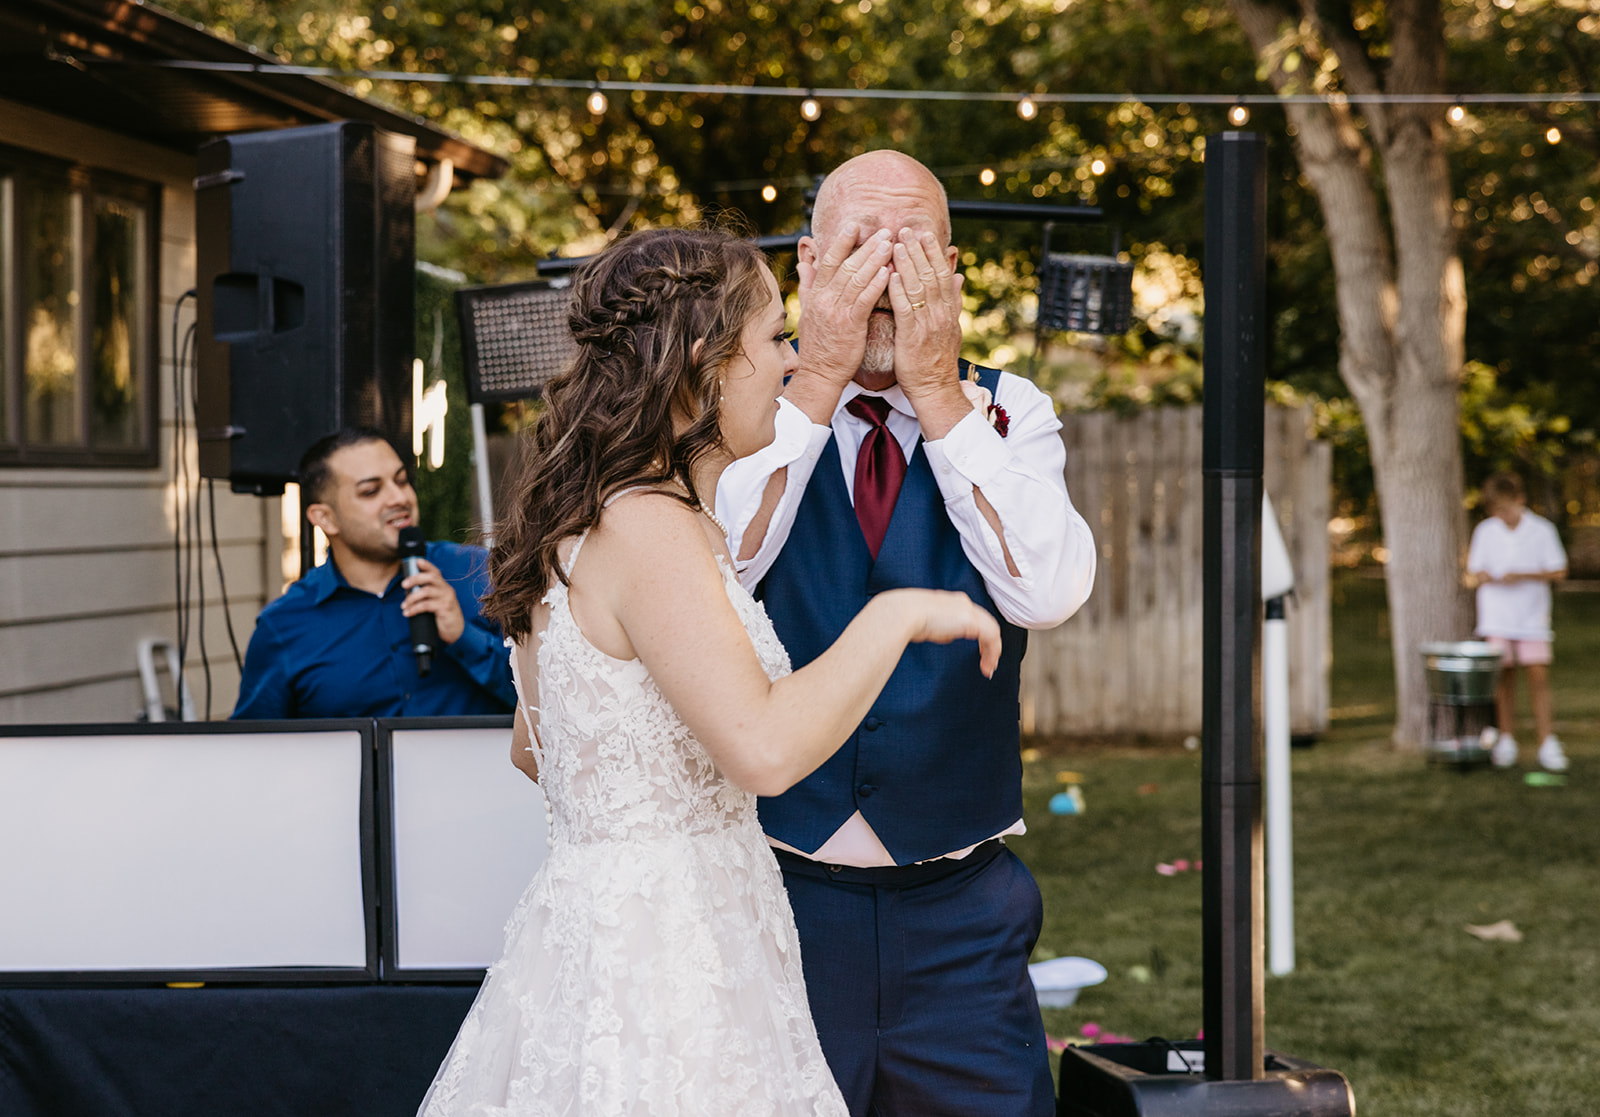 dad crying during his Father daughter dance at wedding